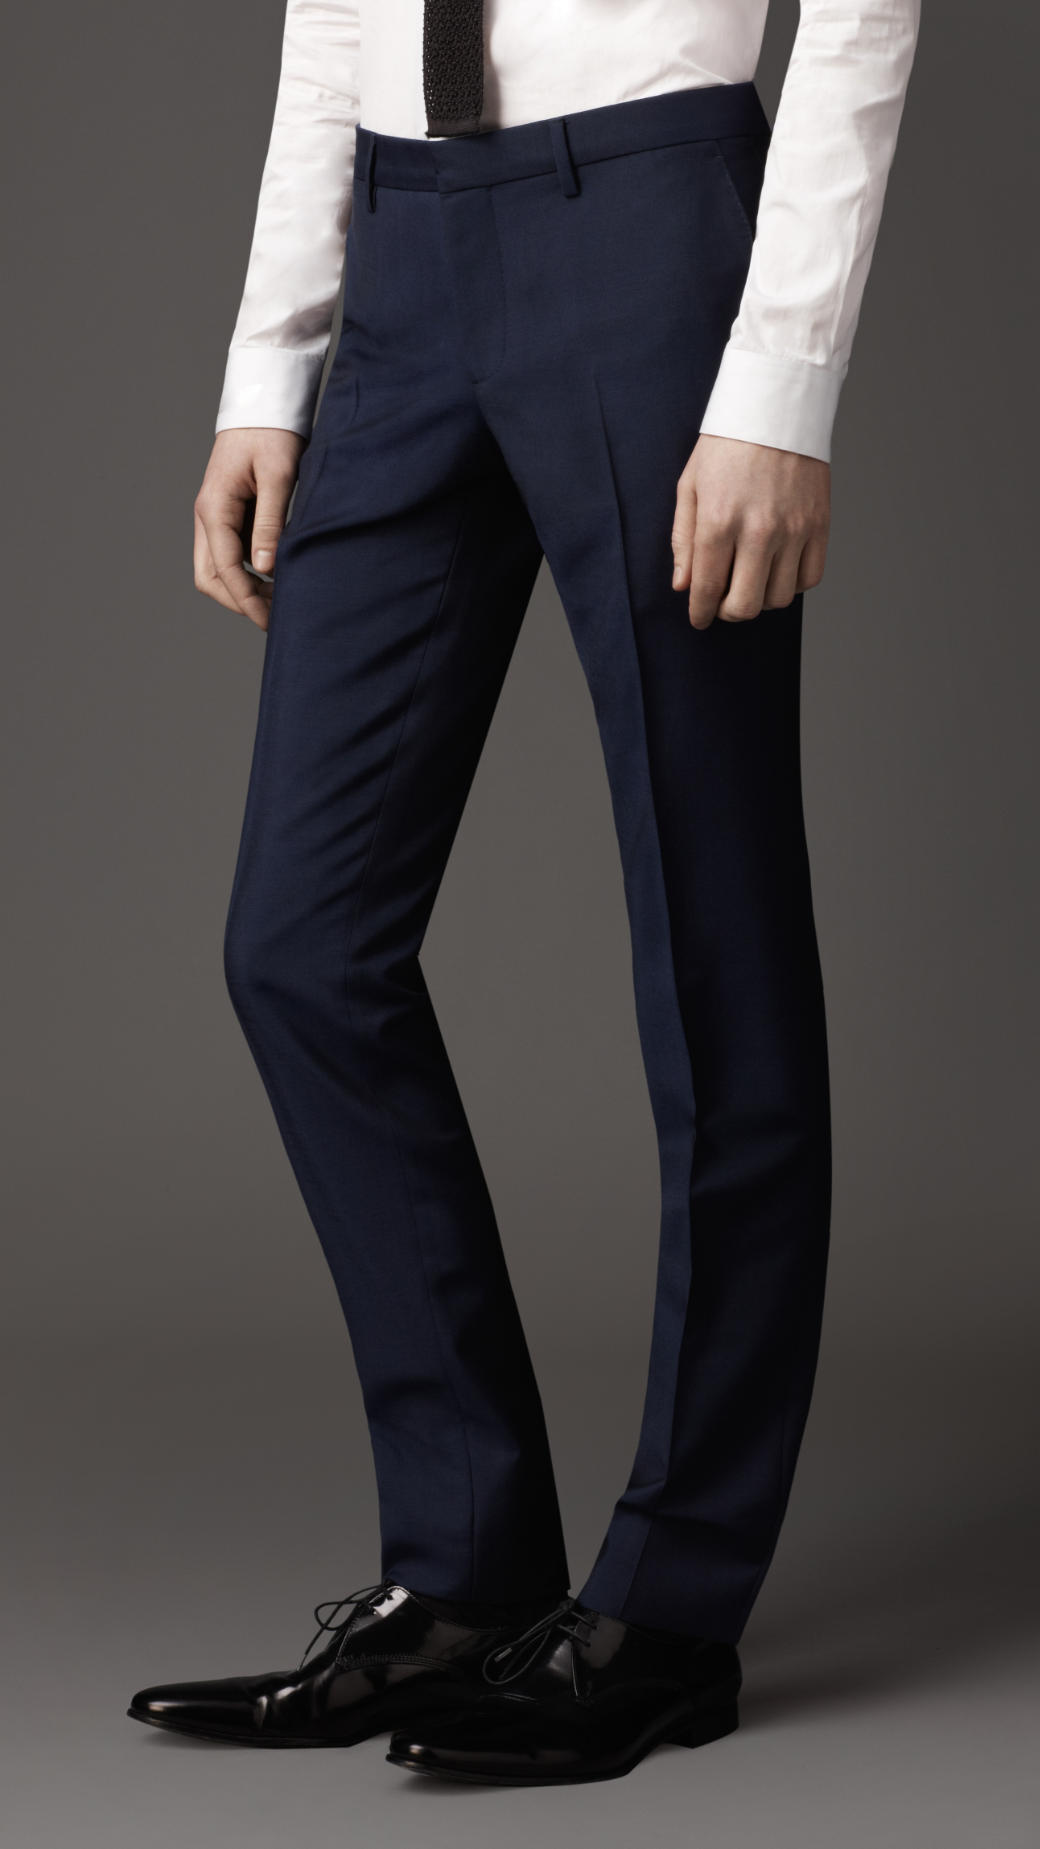 Burberry Slim Fit Wool Mohair Suit in Navy (Blue) for Men - Lyst